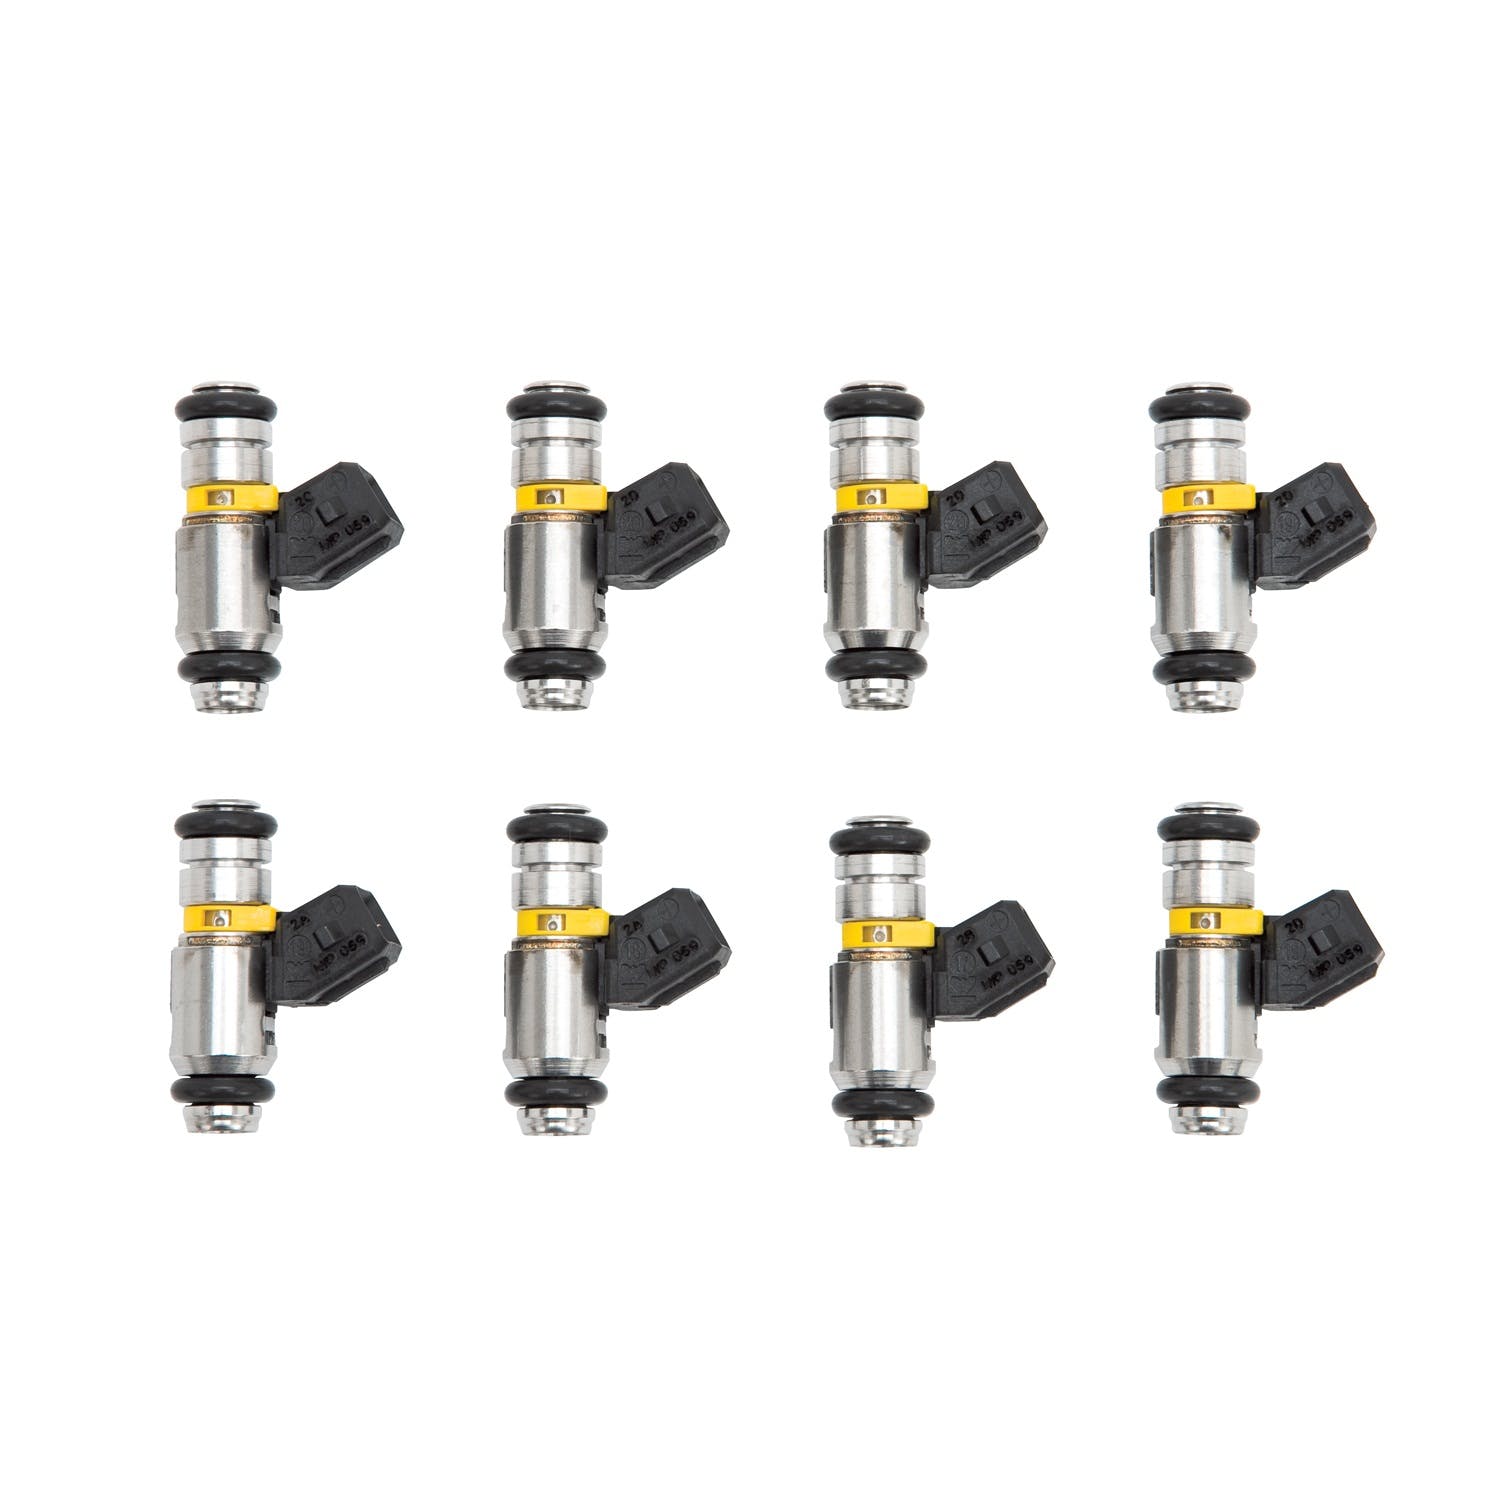 Edelbrock 3684 REPLACEMENT FUEL INJECTOR SET (8) FOR 3550